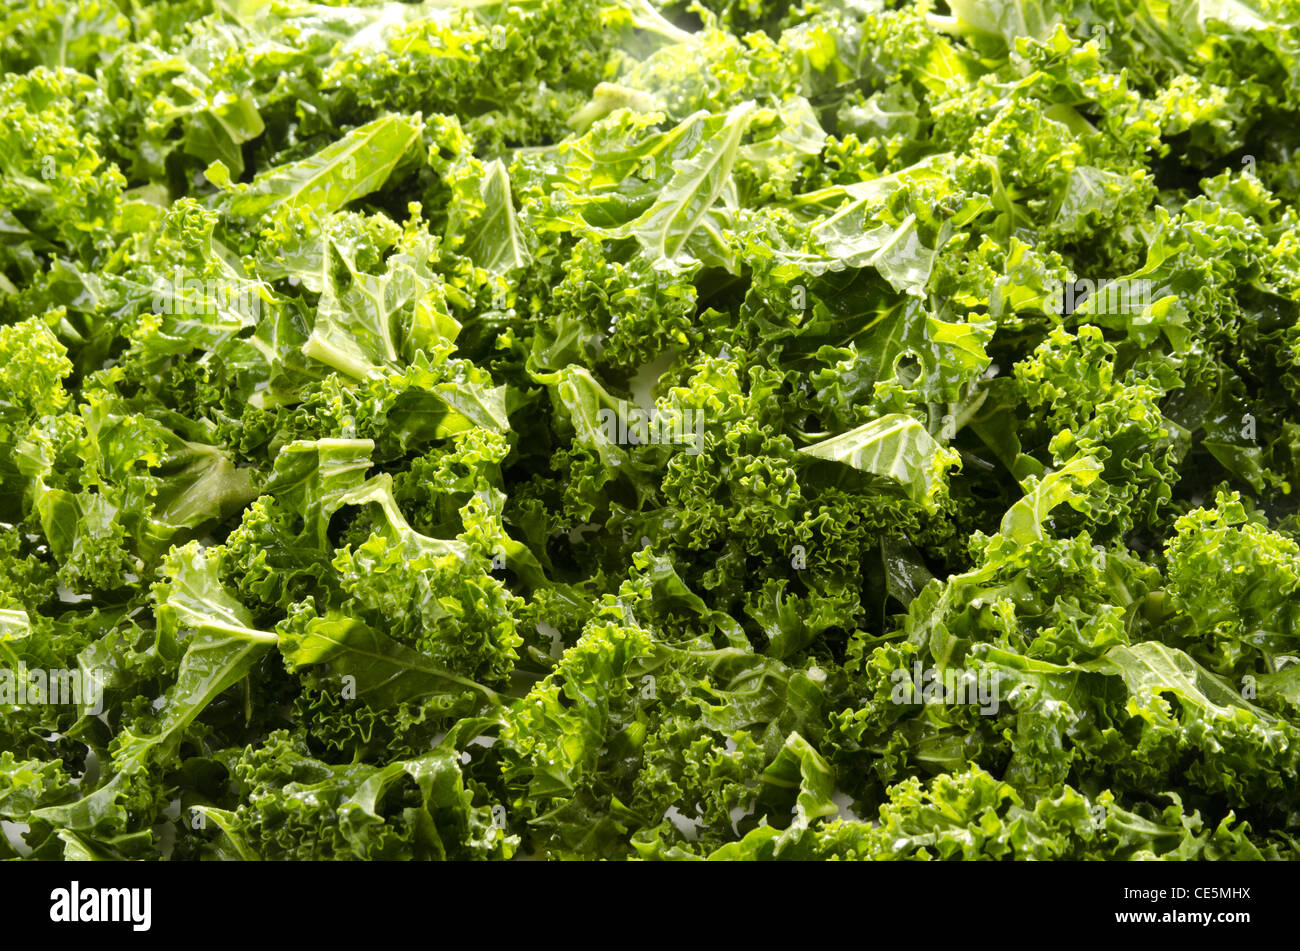 Washed and sliced curly kale Stock Photo